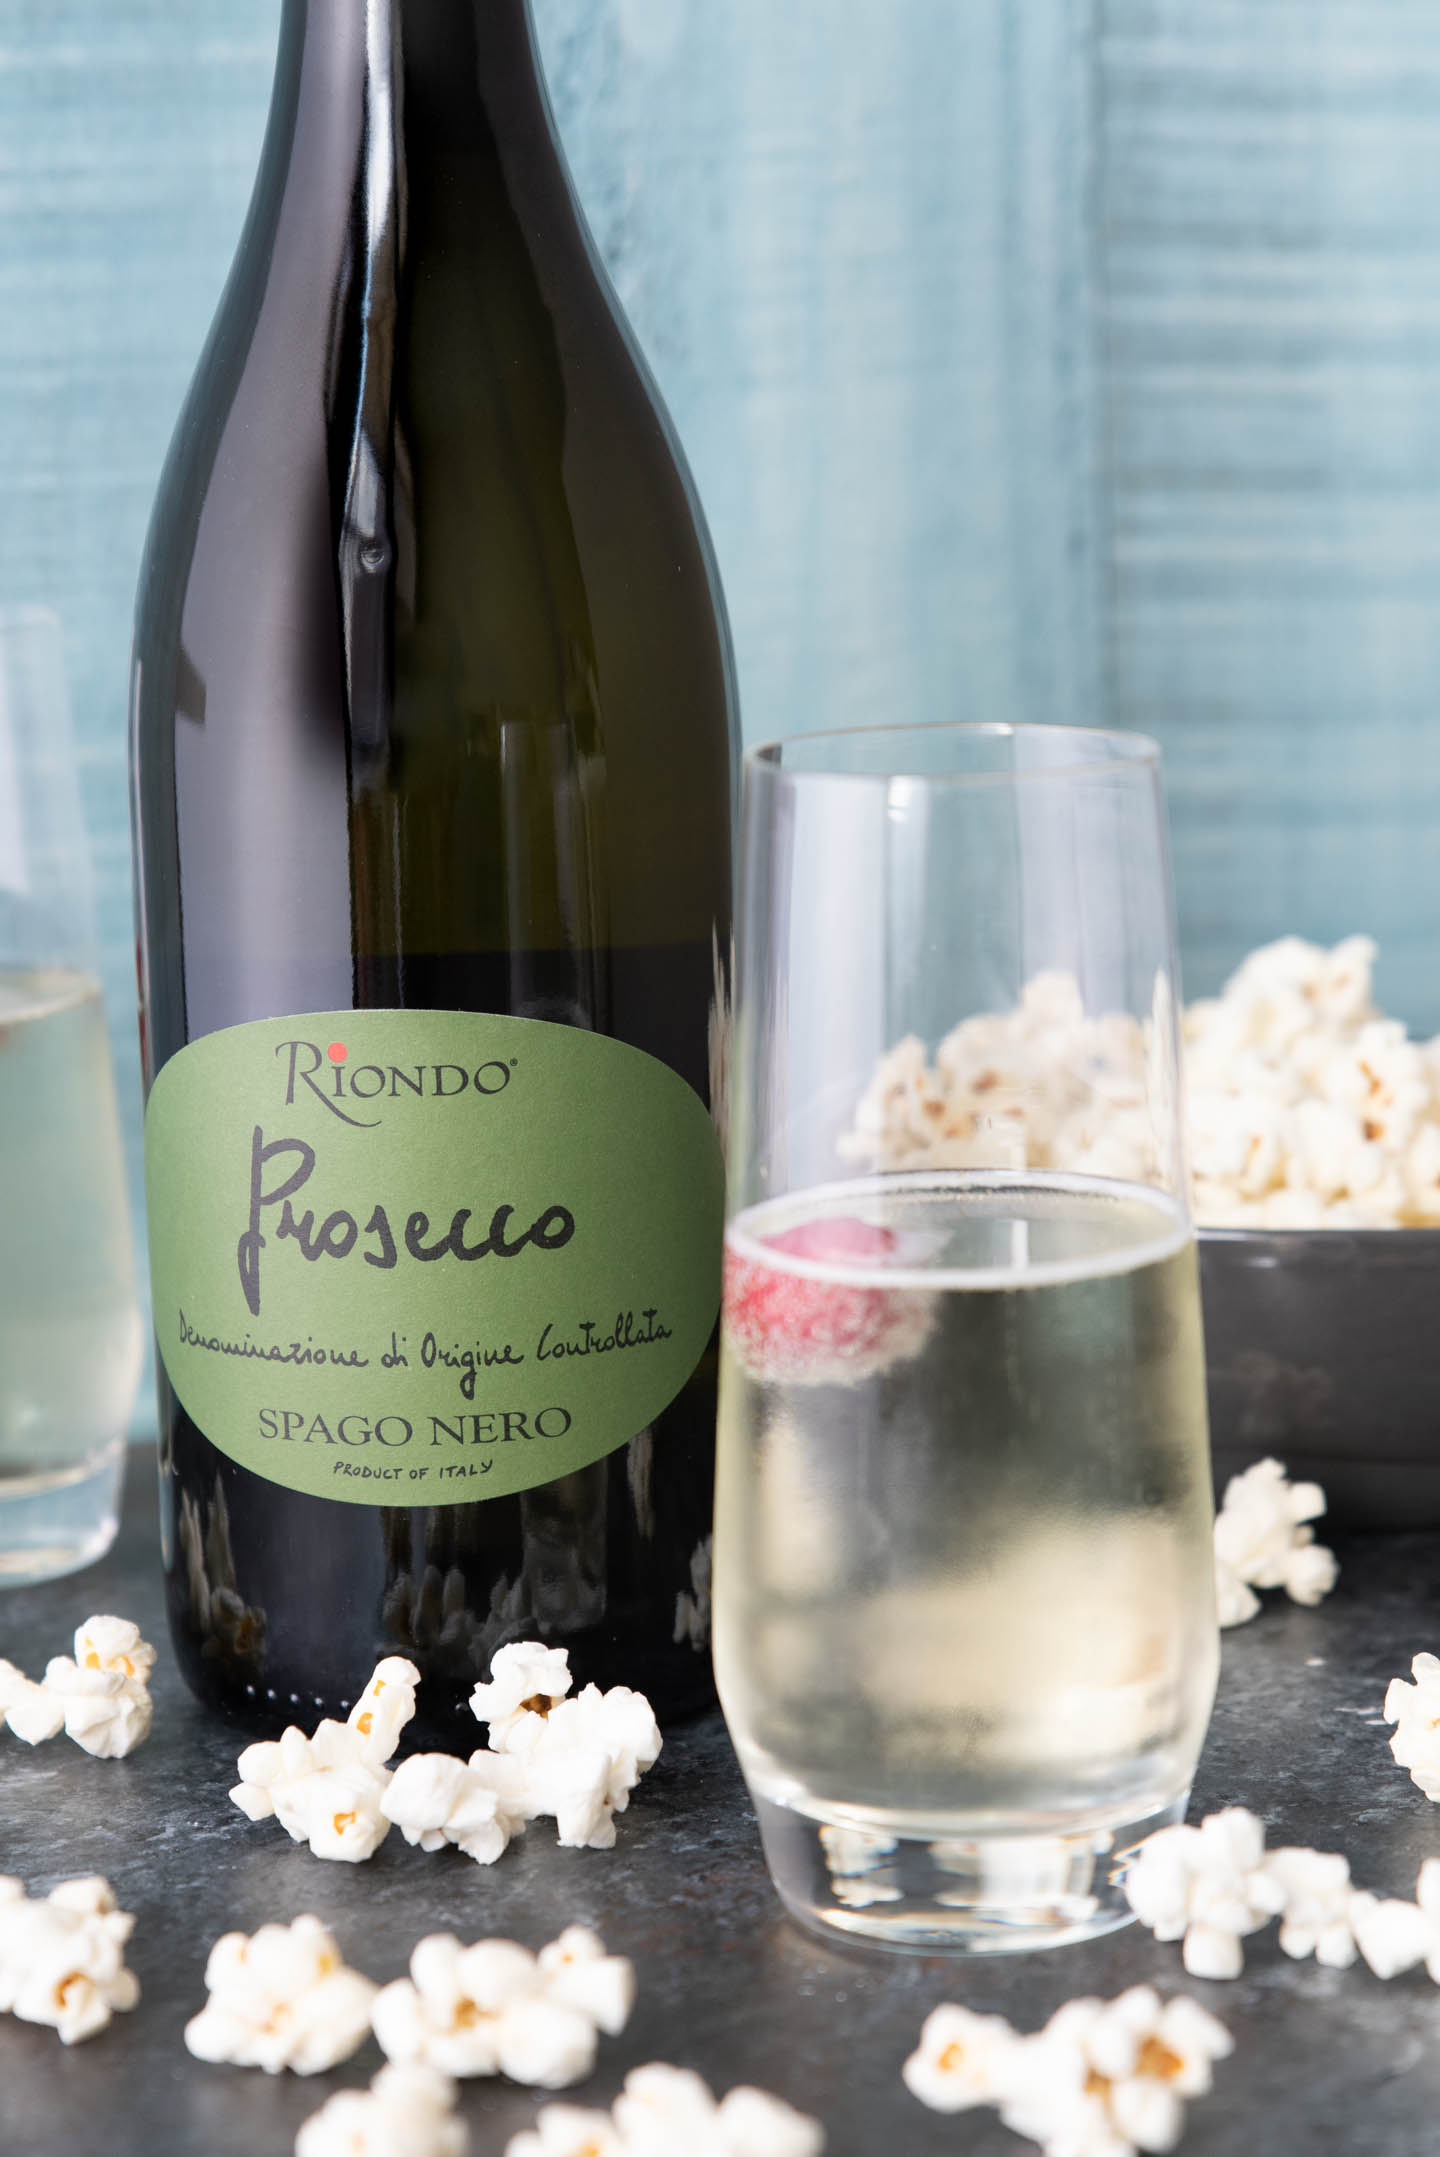 Prosecco cocktail with bottle of Riondo Prosecco